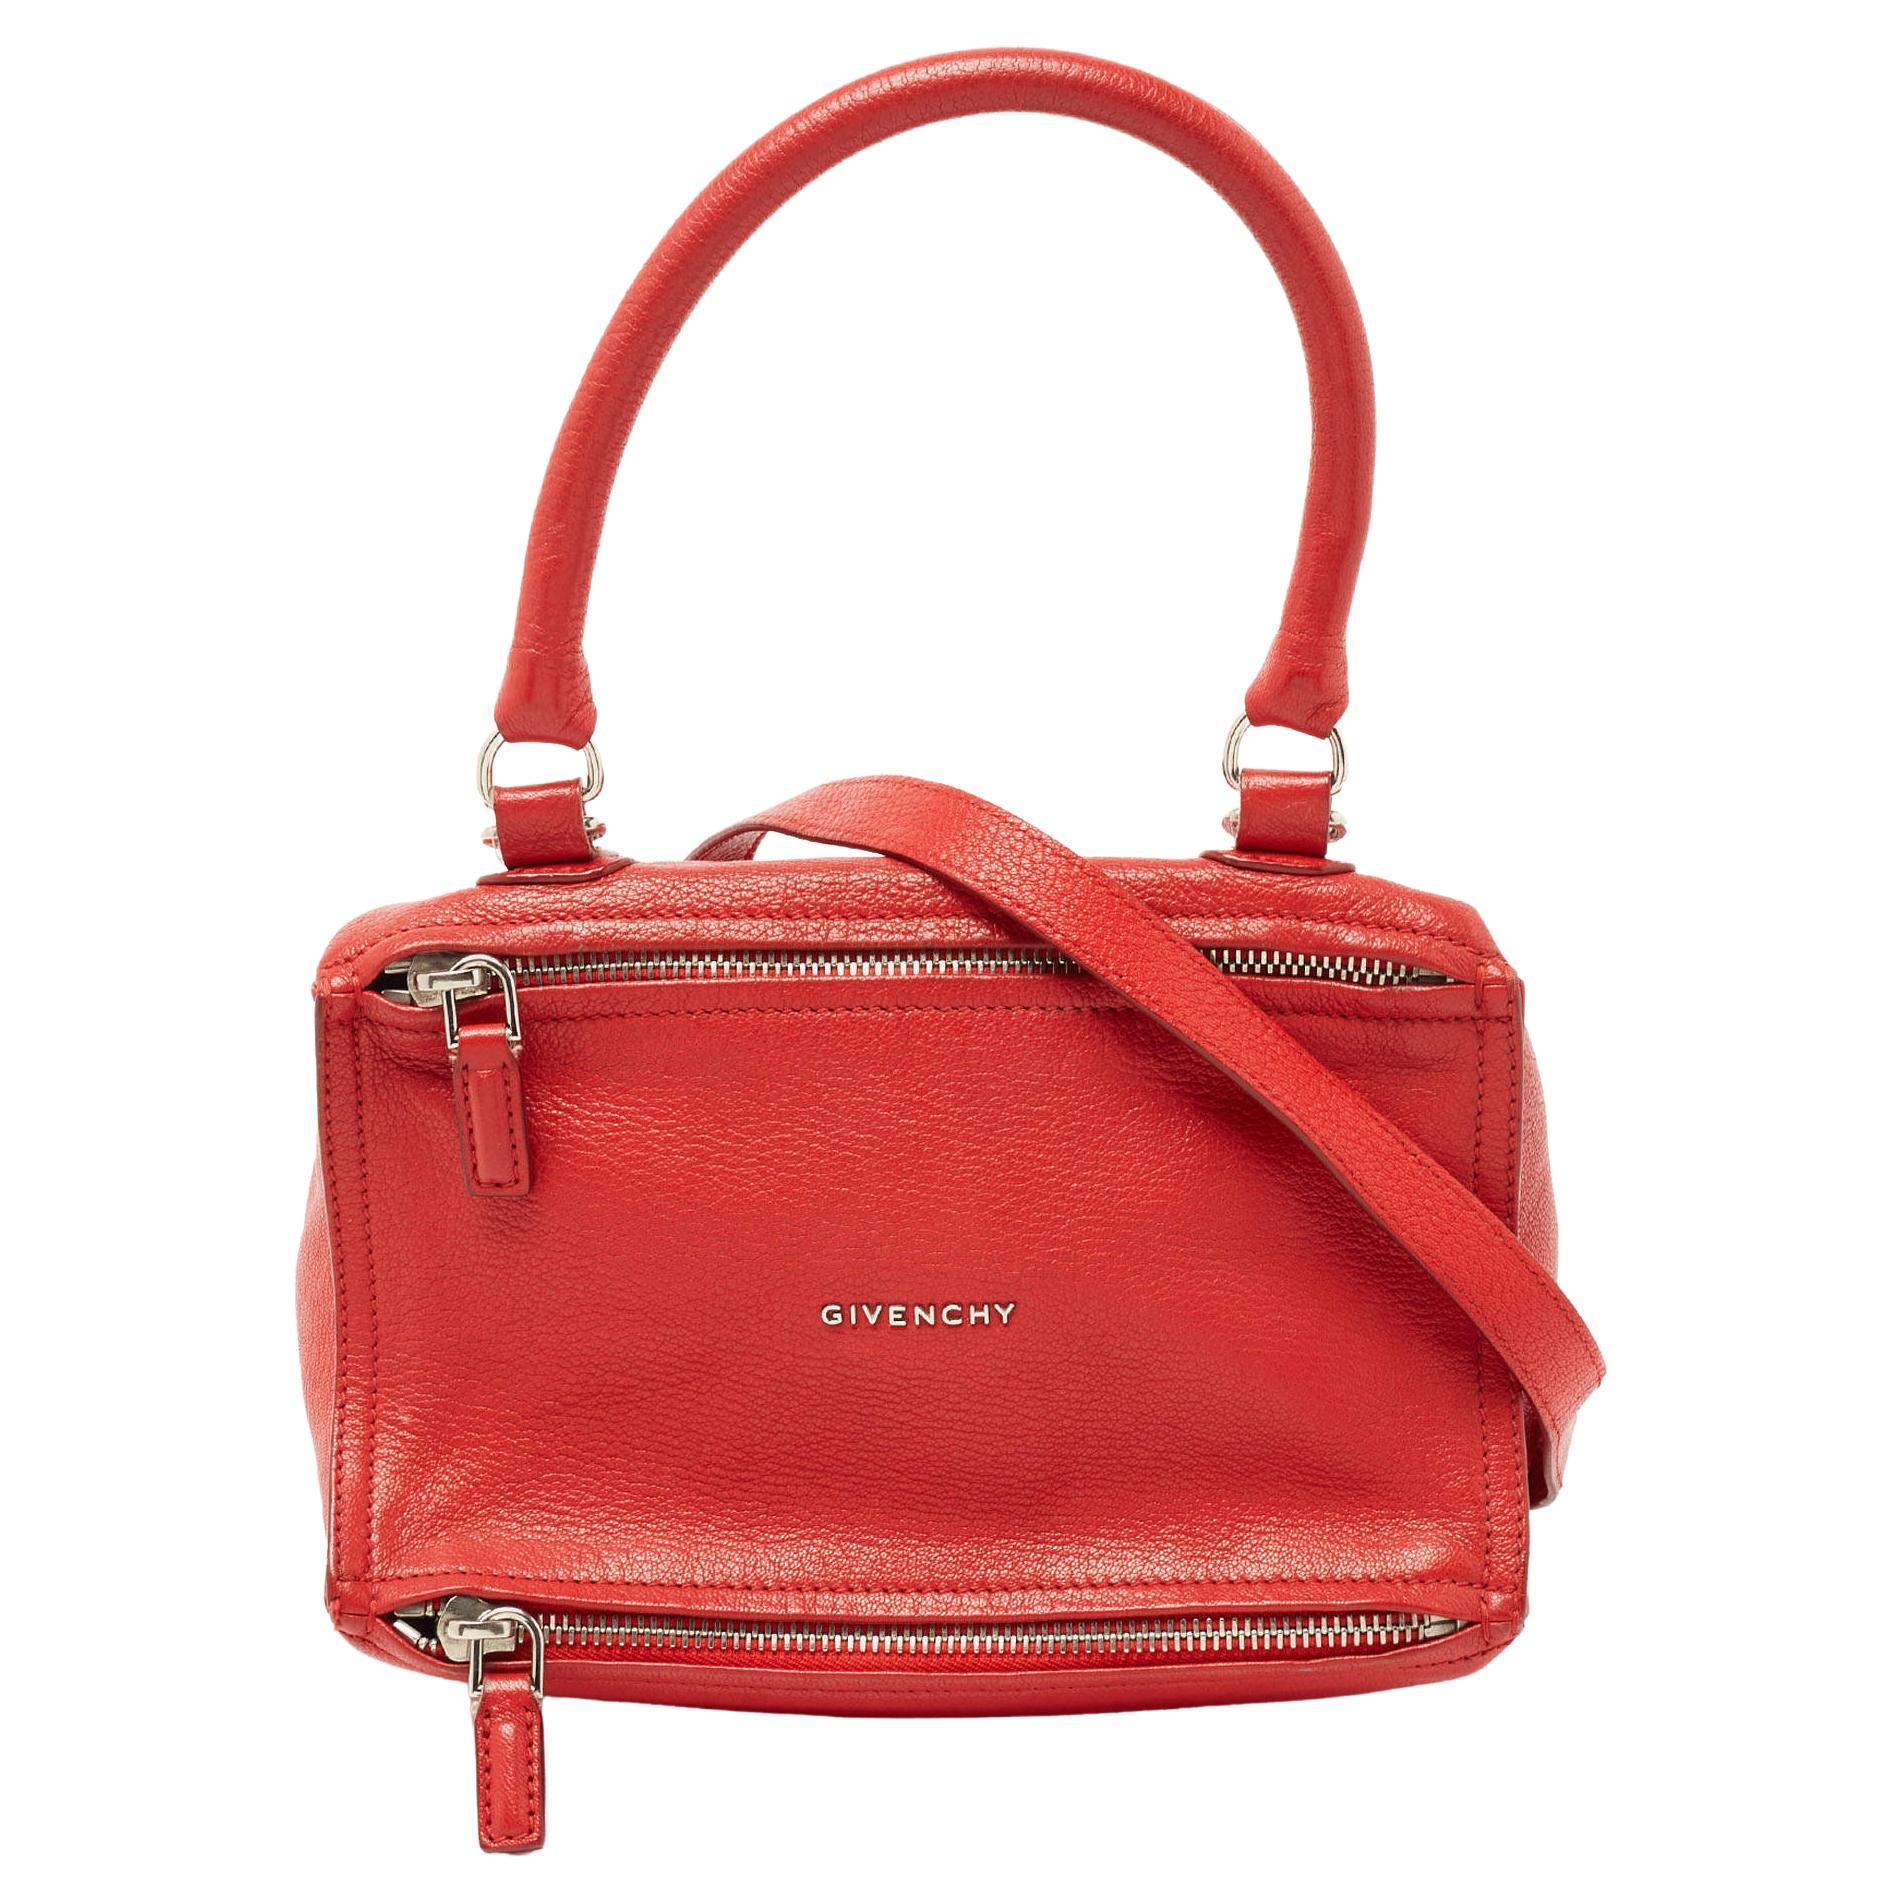 Givenchy Red Leather Small Pandora Messenger Bag